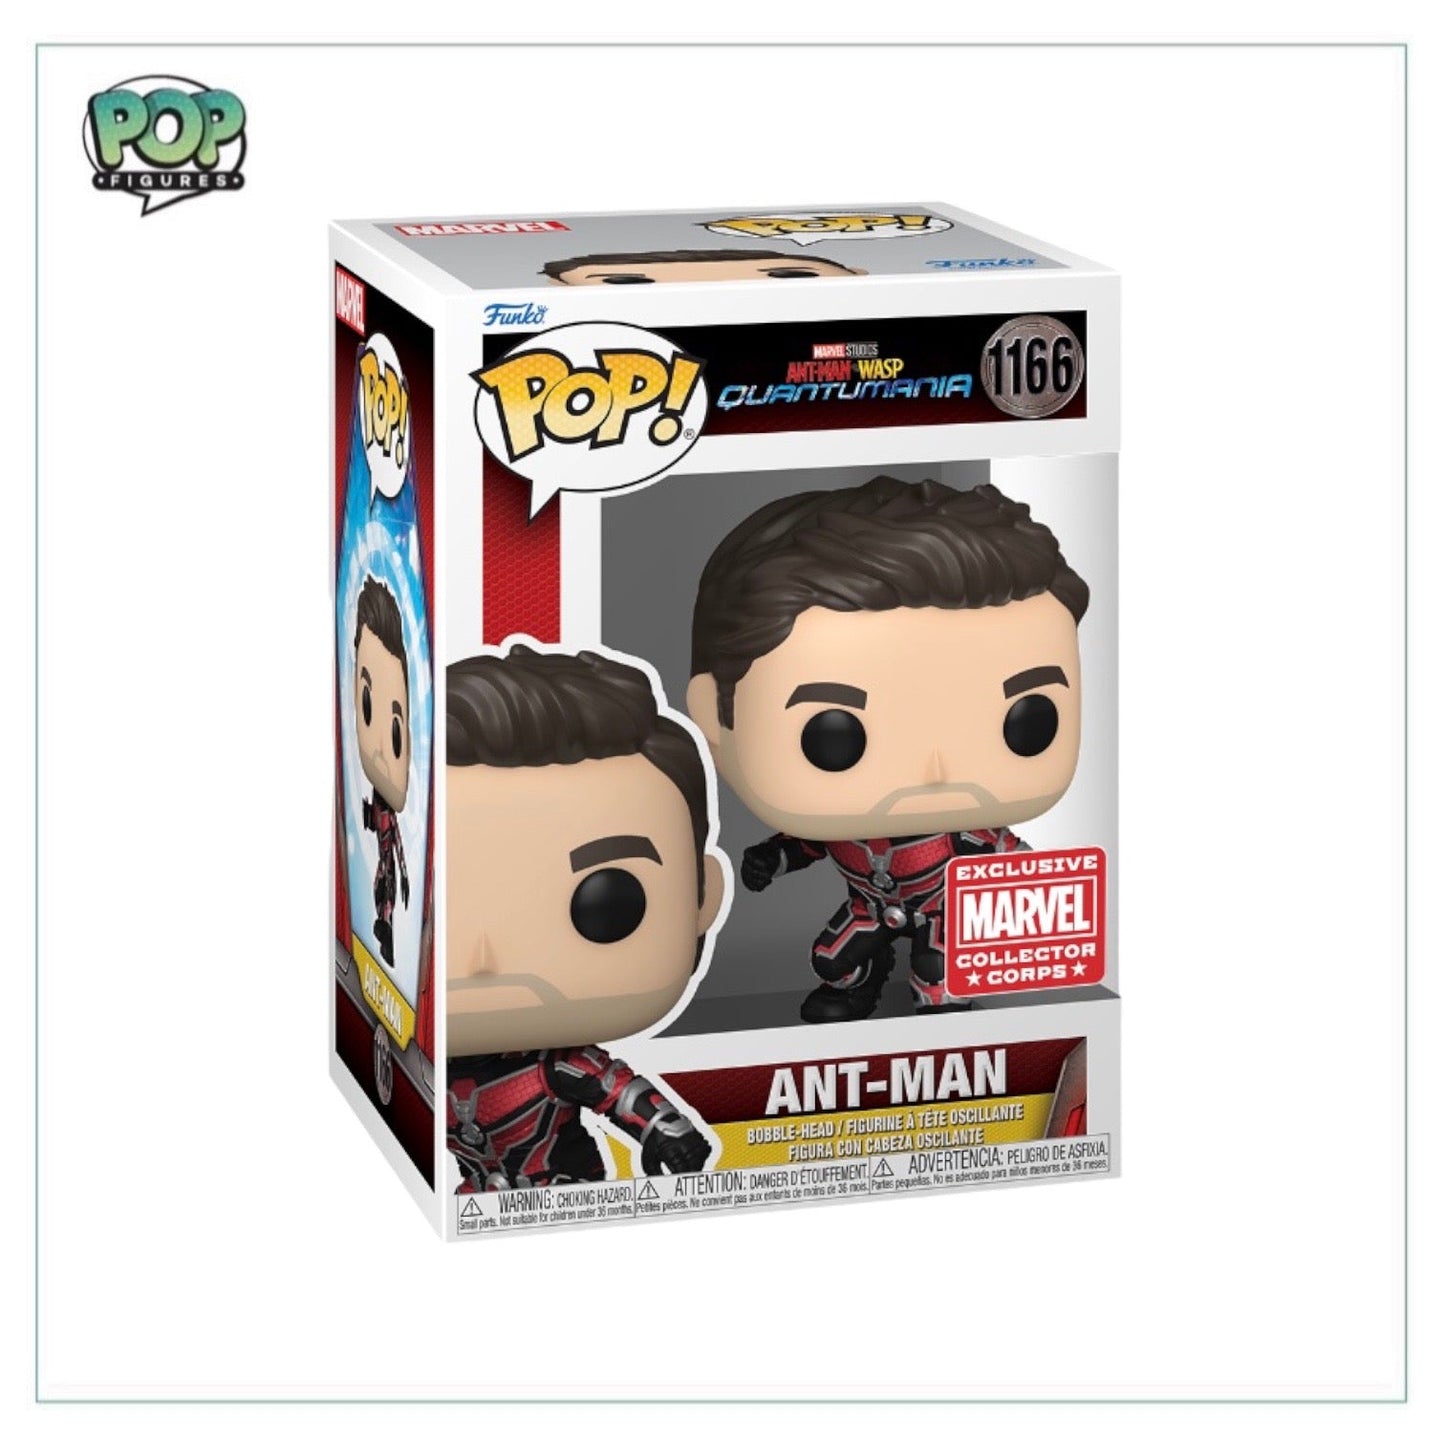 Ant-Man #1166 Funko Pop! - Ant-Man And The Wasp Quantumania - Marvel Collector Corps Exclusive - Angry Cat